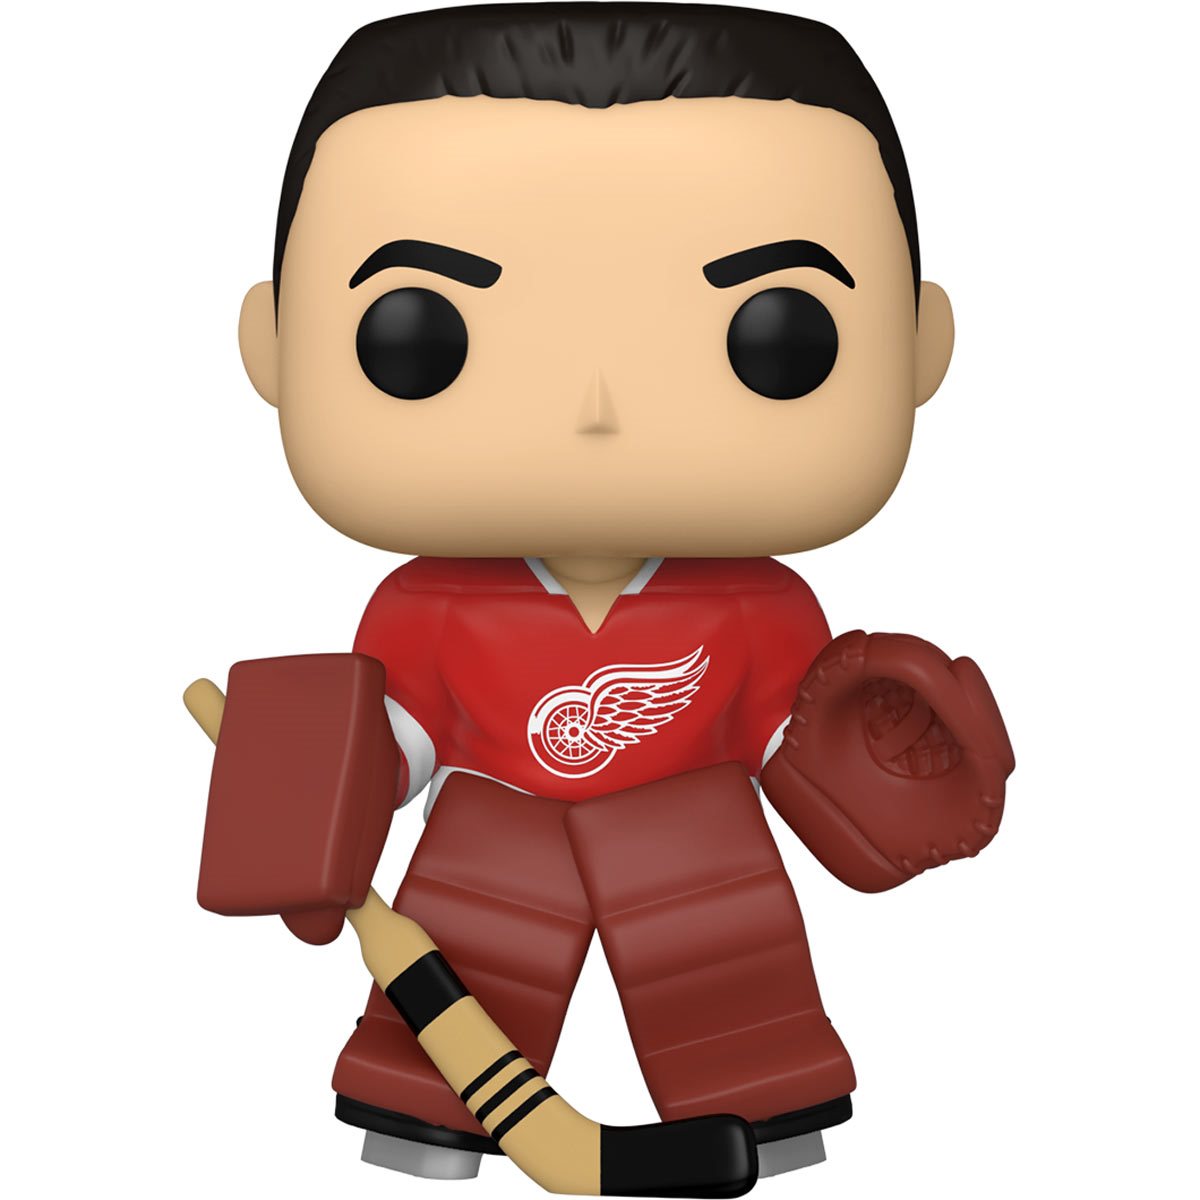 Funko Pop NHL Legends: Red Wings - Terry Sawchuk